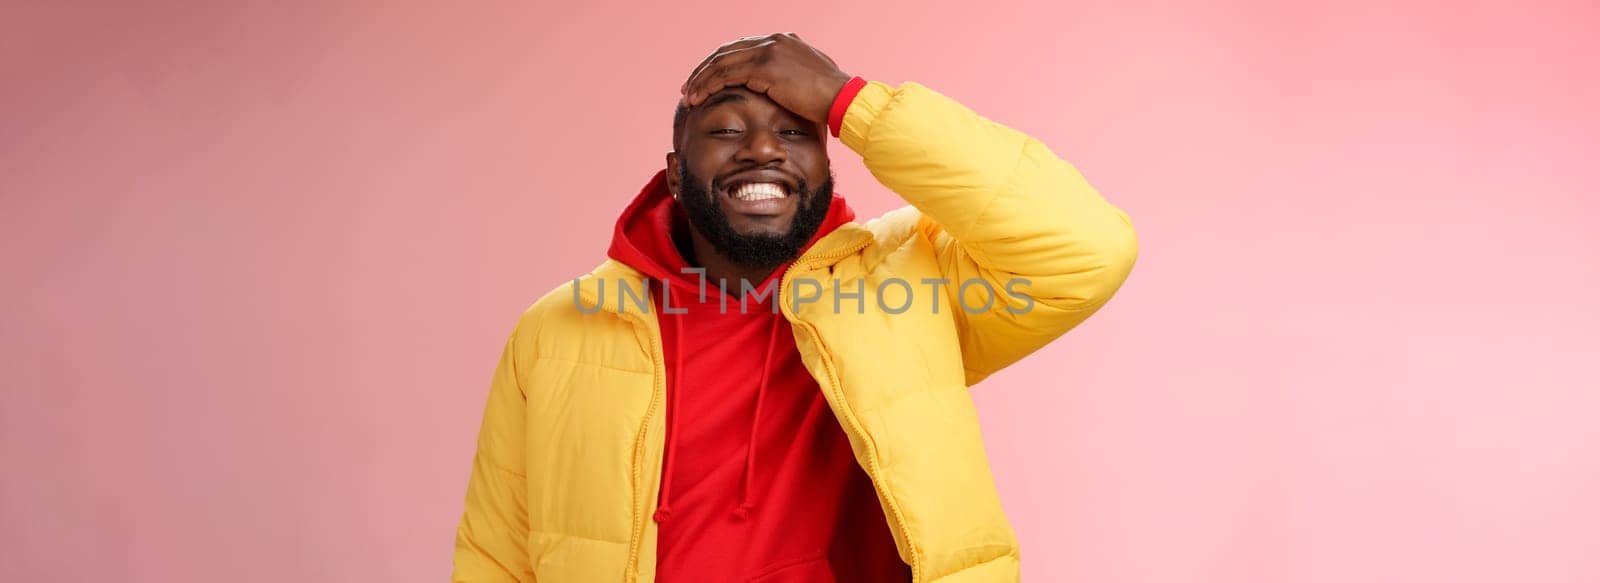 Charming cute black bearded 25s guy forget something stupid silly smiling friendly punch forehead grinning feel awkward say sorry standing pink background joyfully relaxed by Benzoix